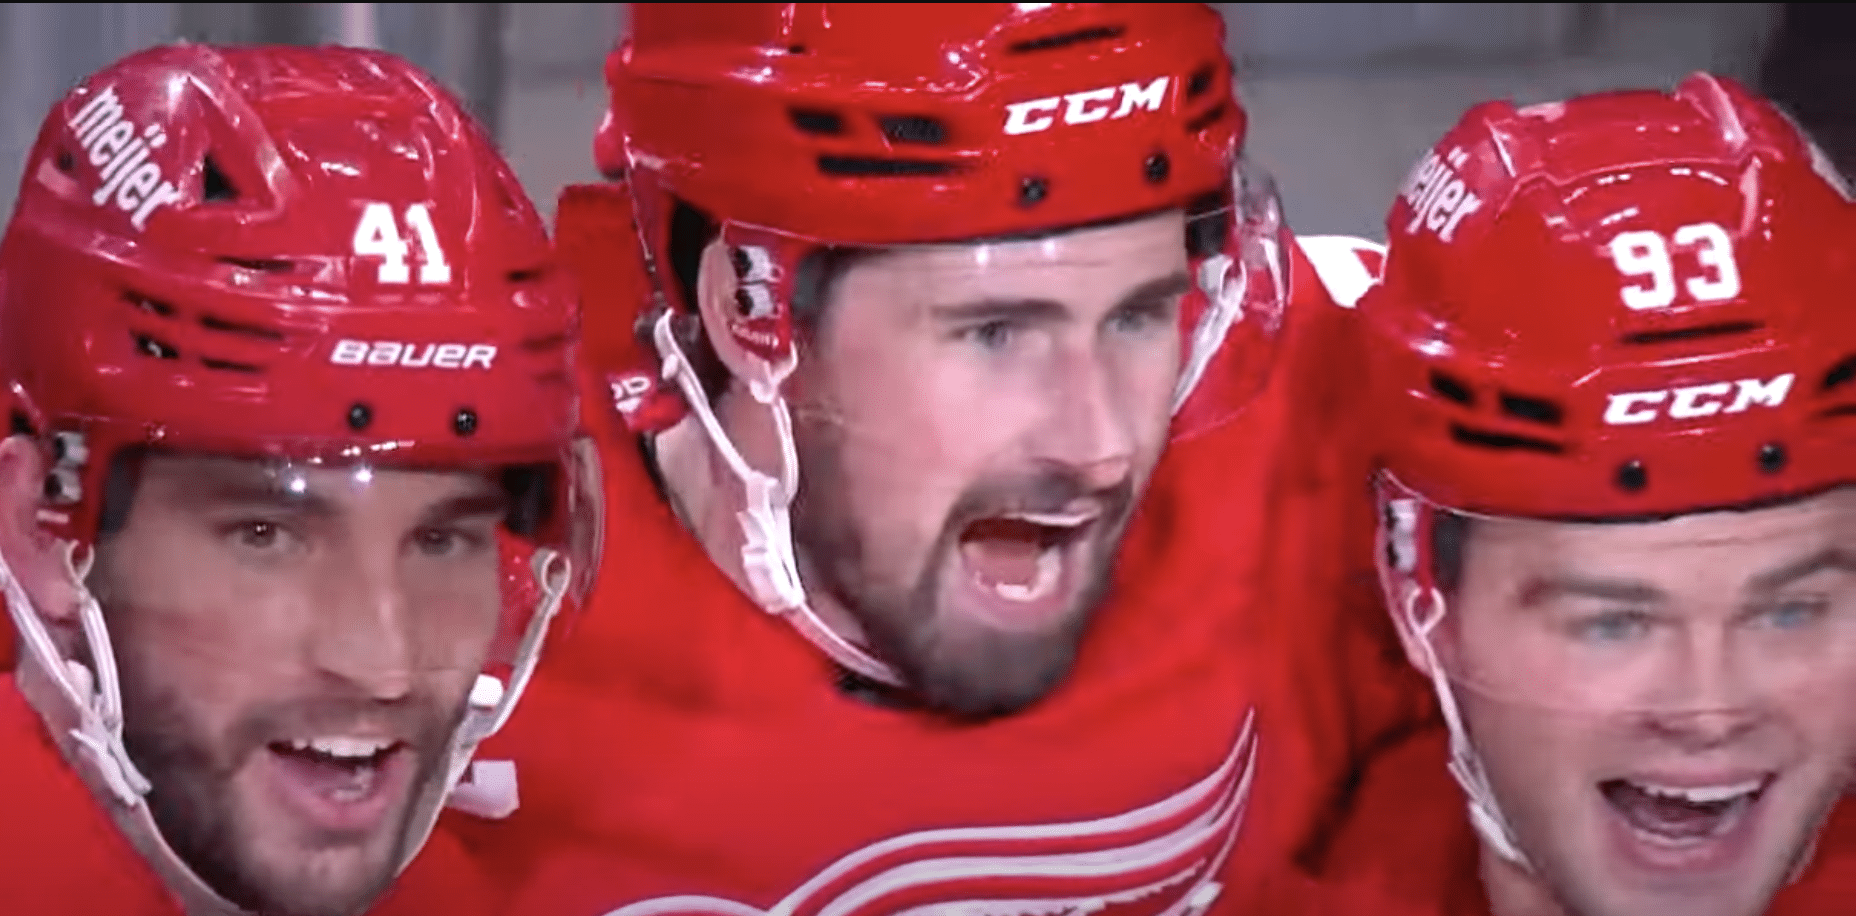 Detroit Red Wings praise their fans